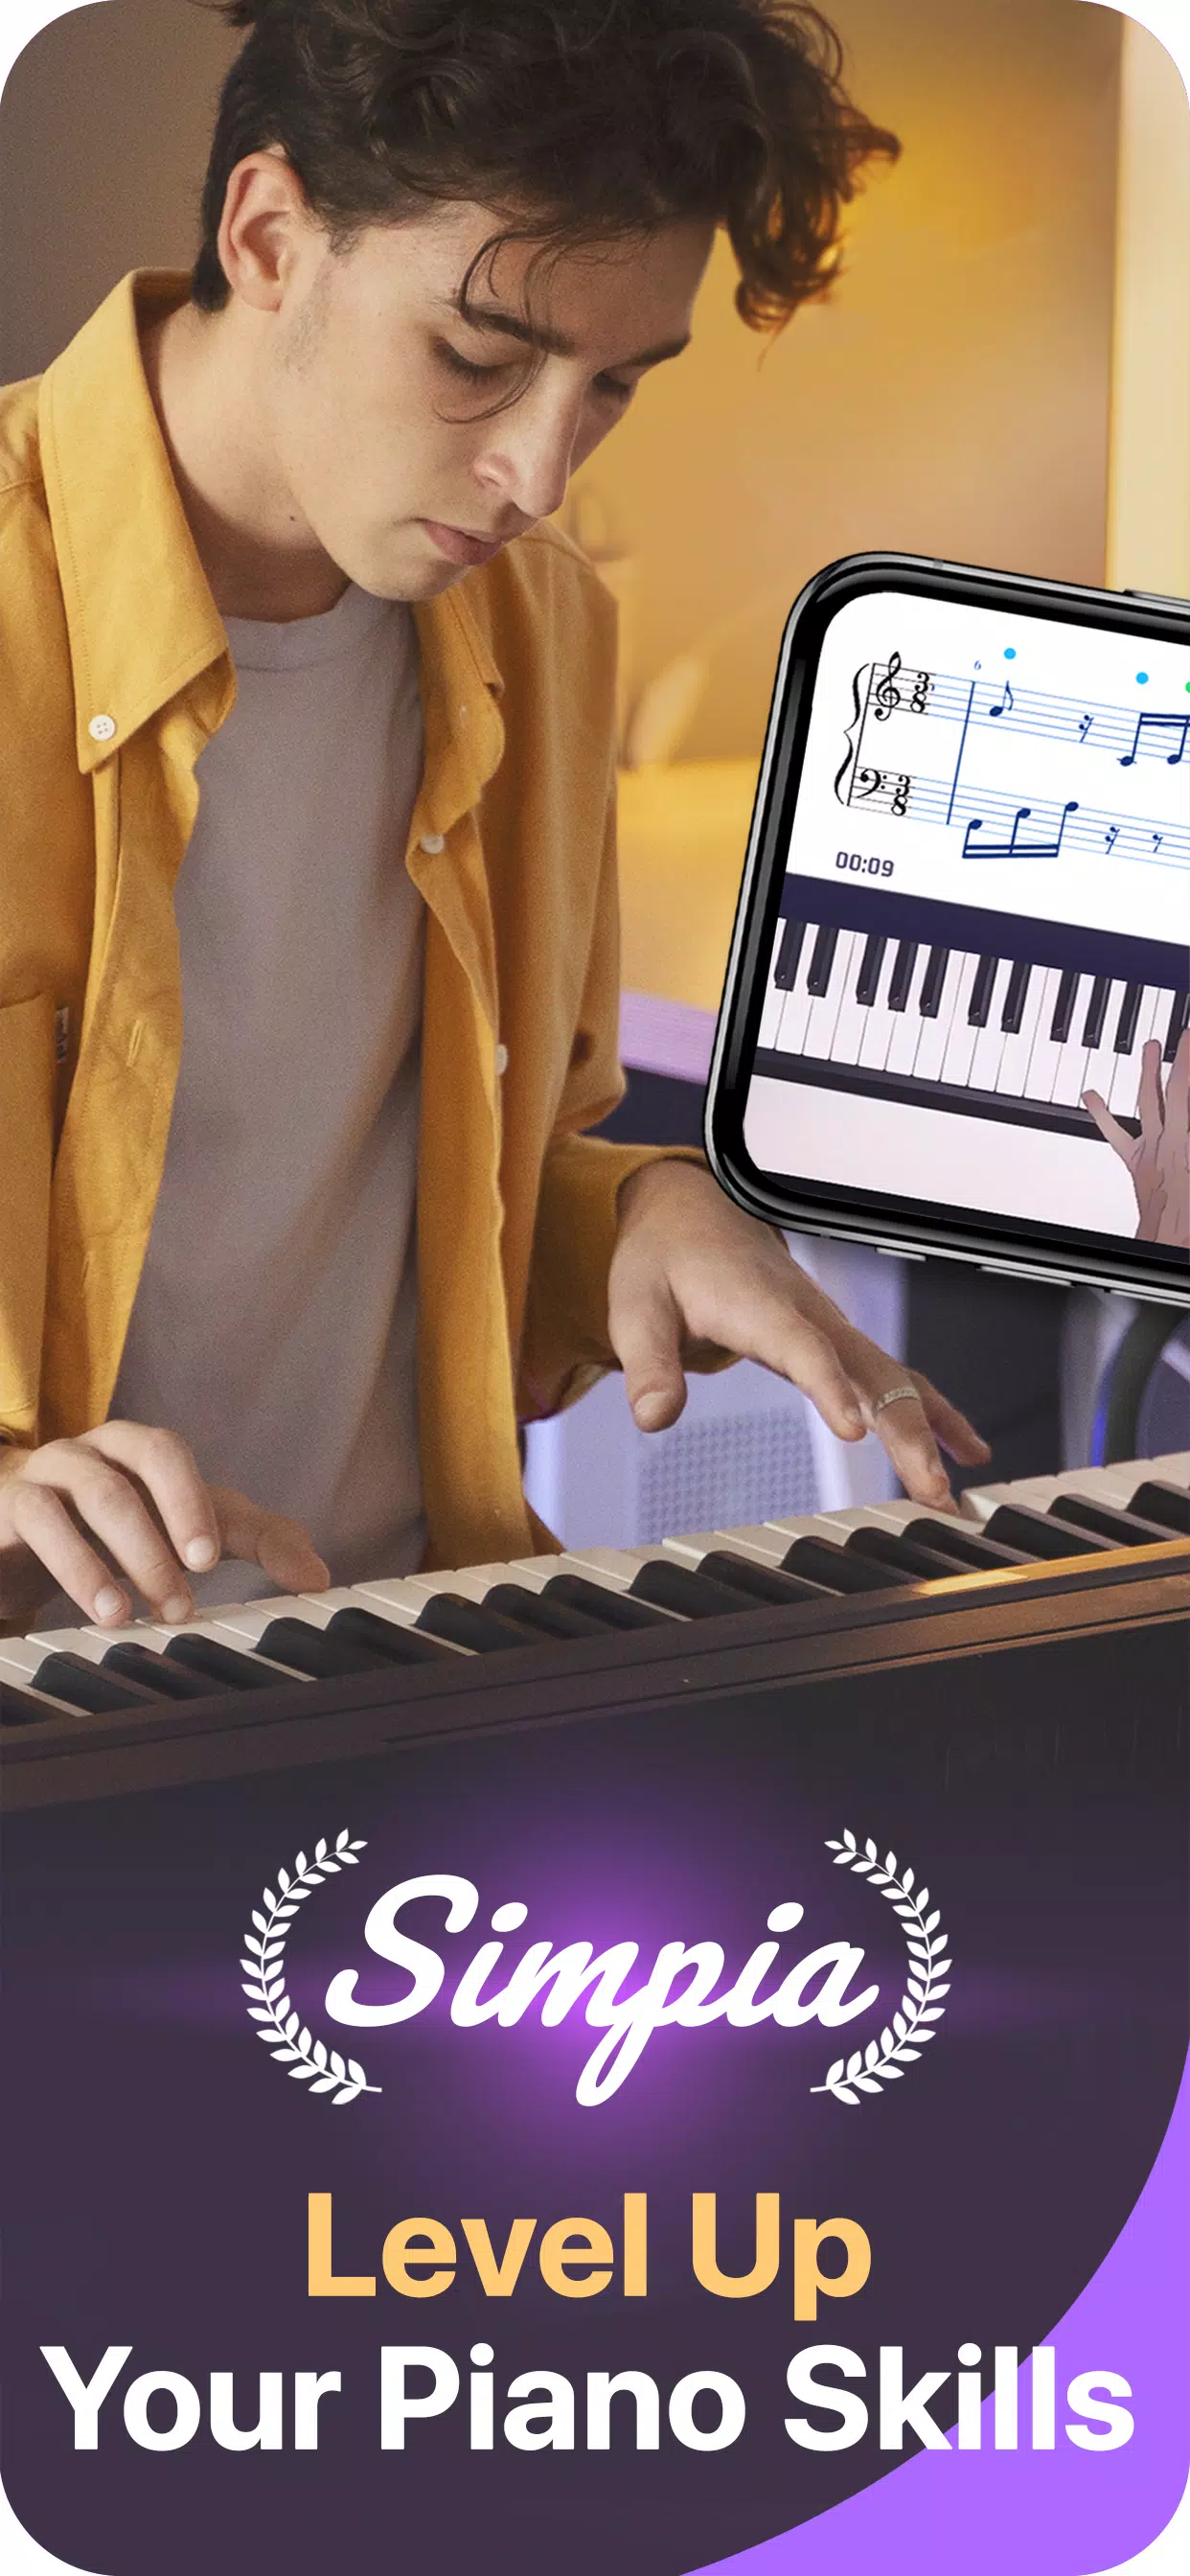 Stream Experience the Joy of Playing Piano with Piano APK Download